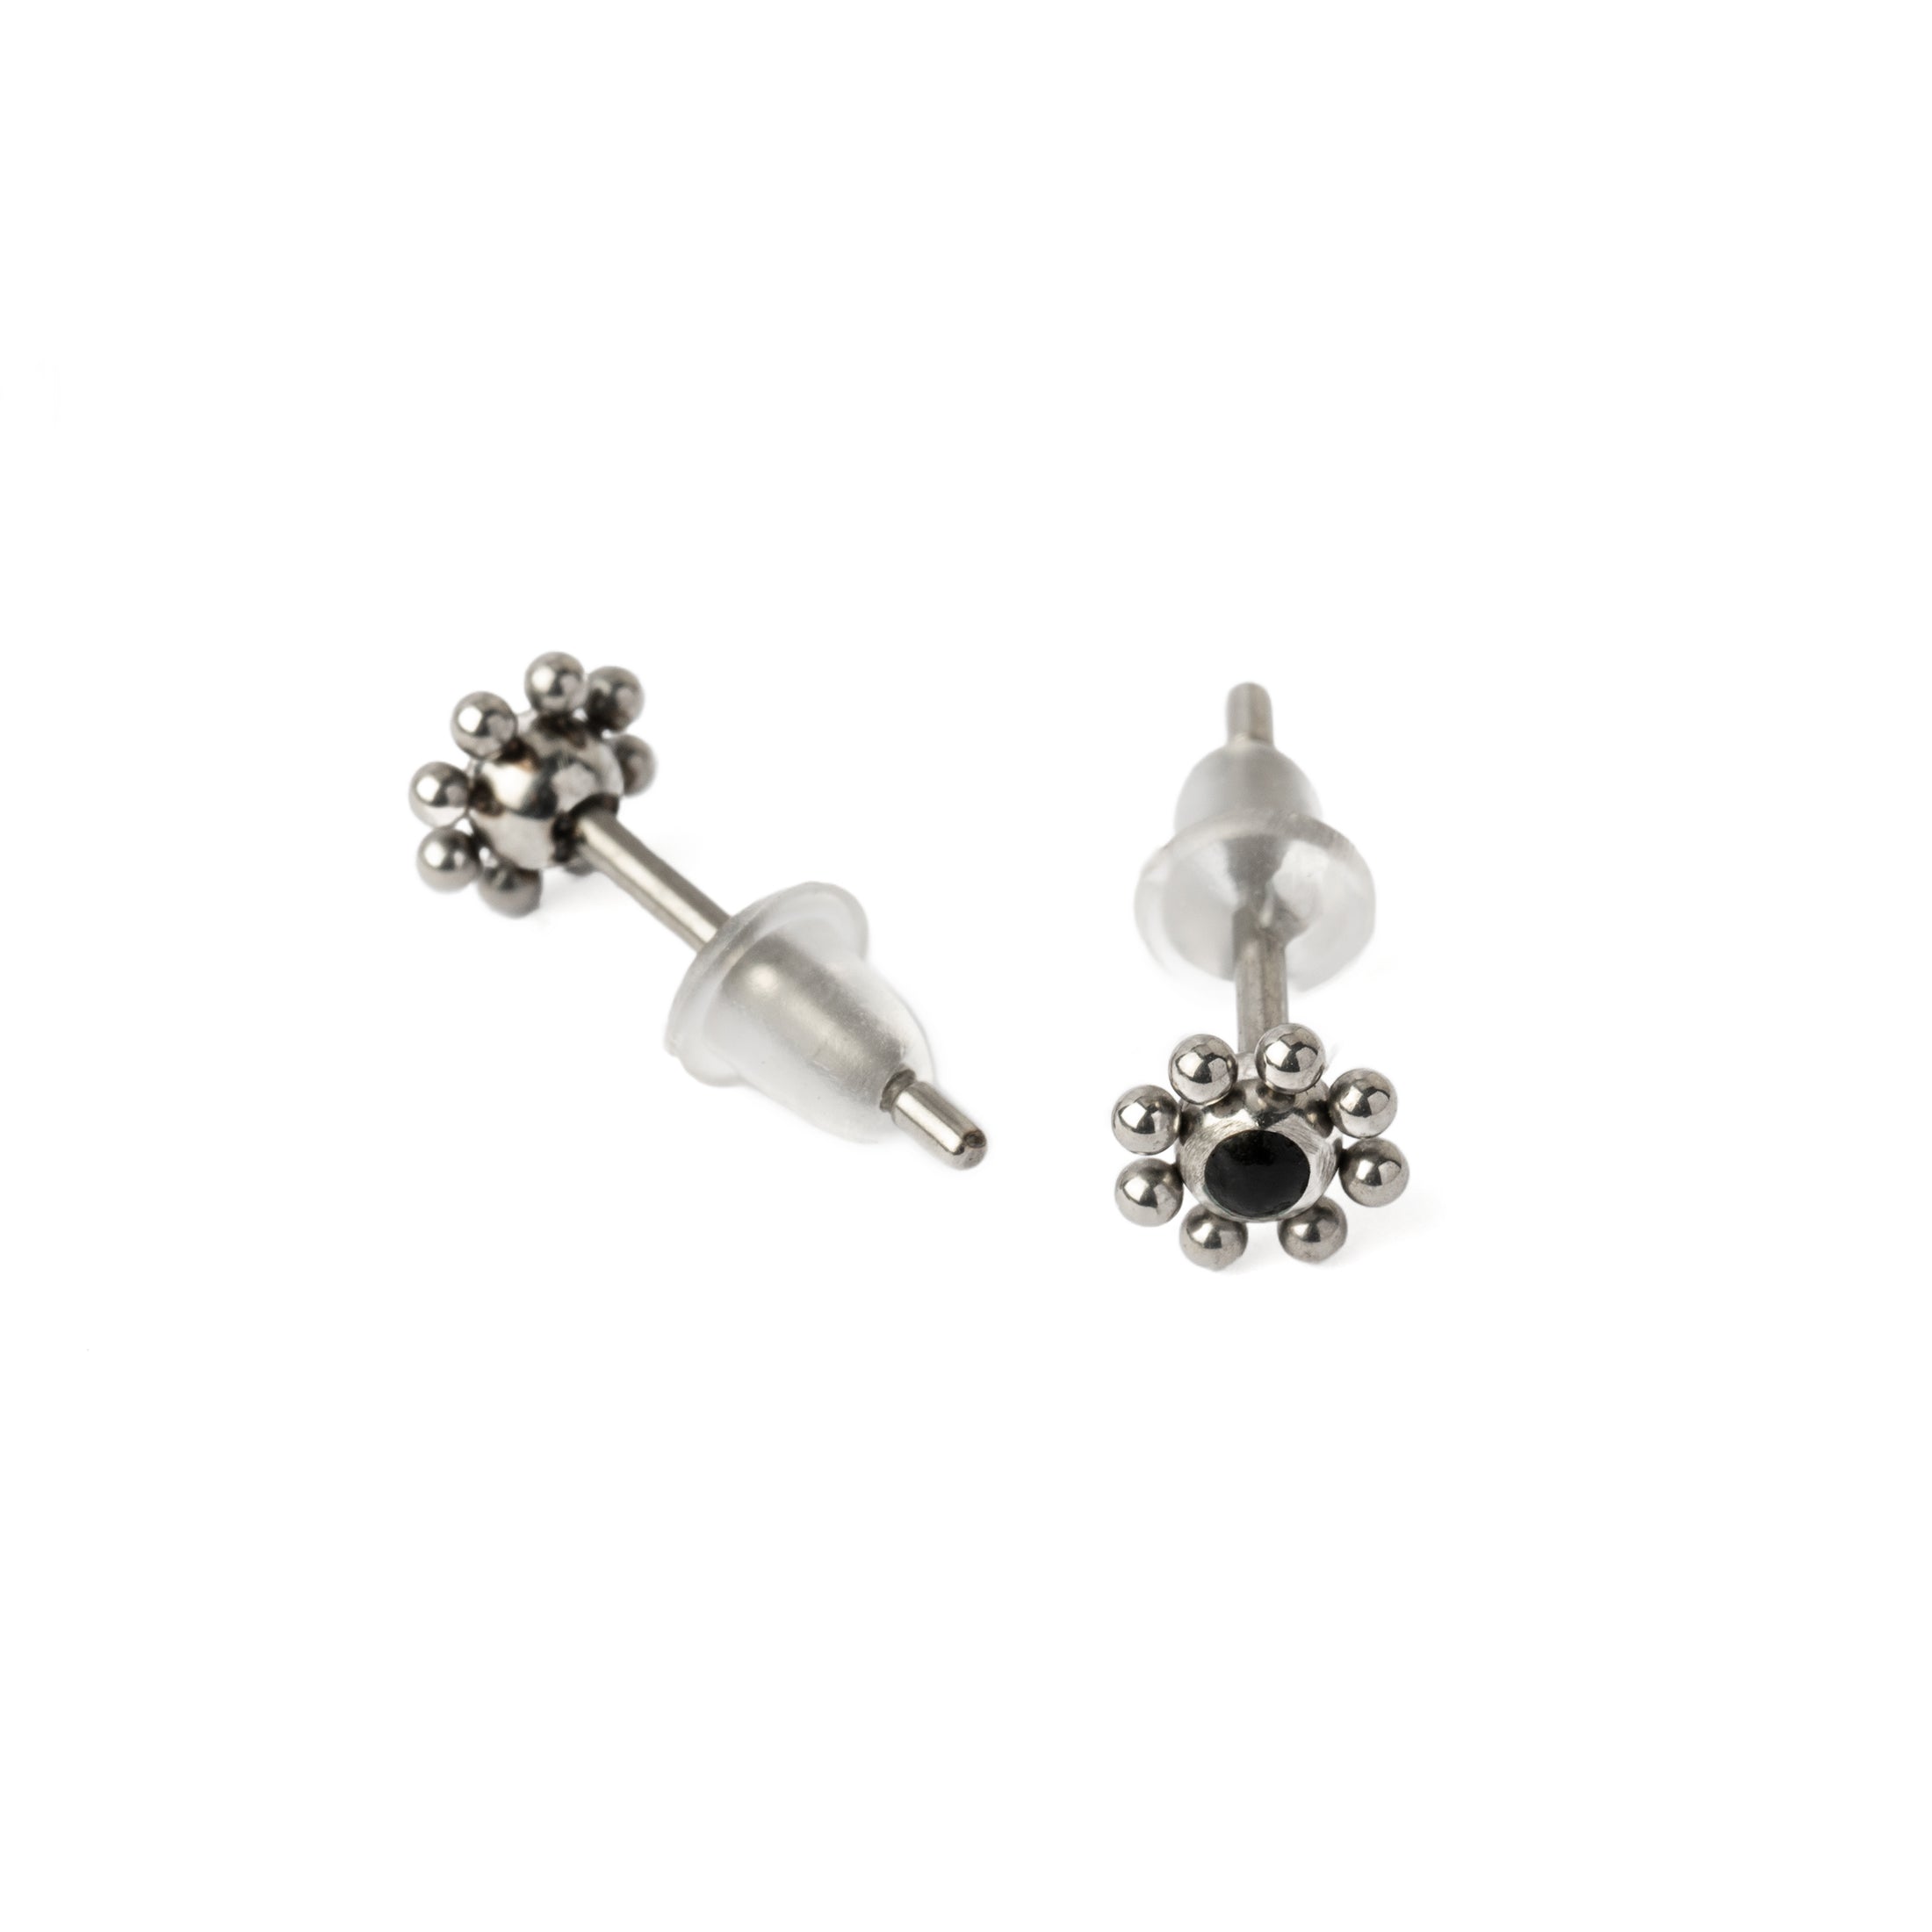 Daisy Black Shell Ear Studs front and back view